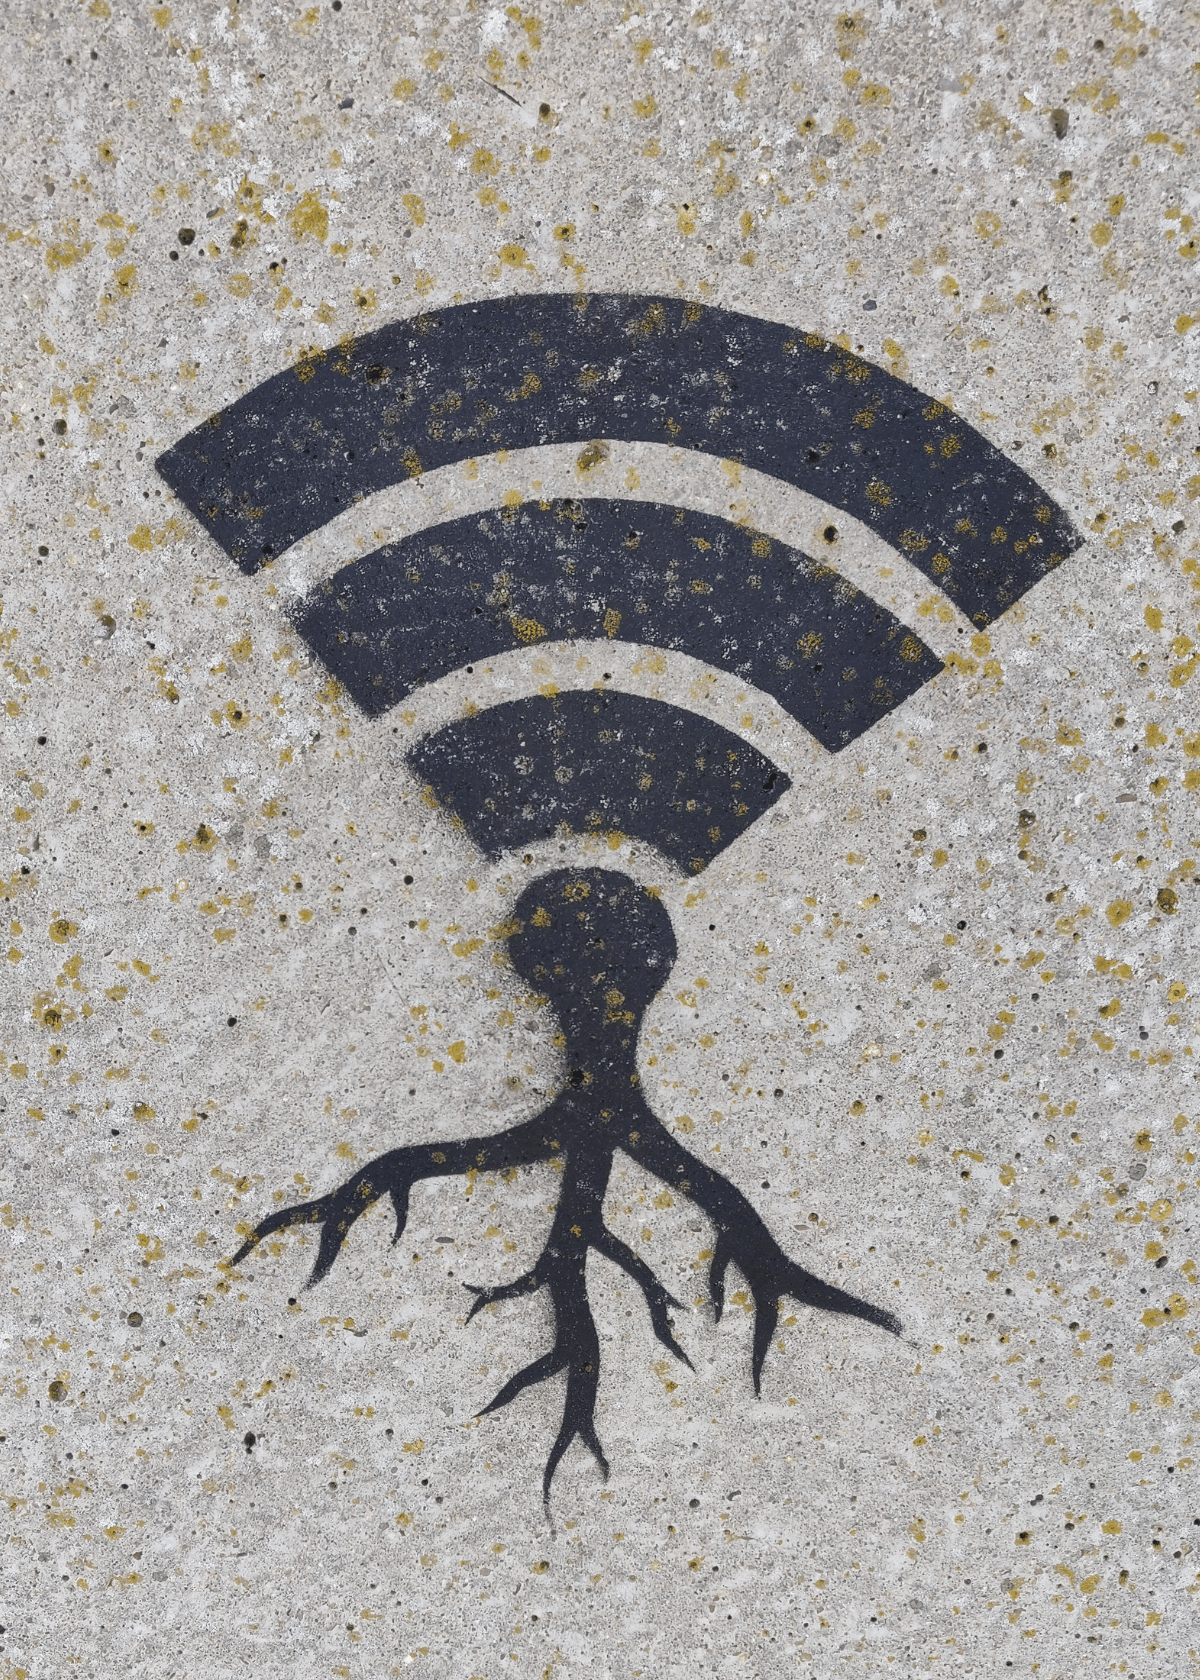 17 Ways to Boost Your Wifi Signals